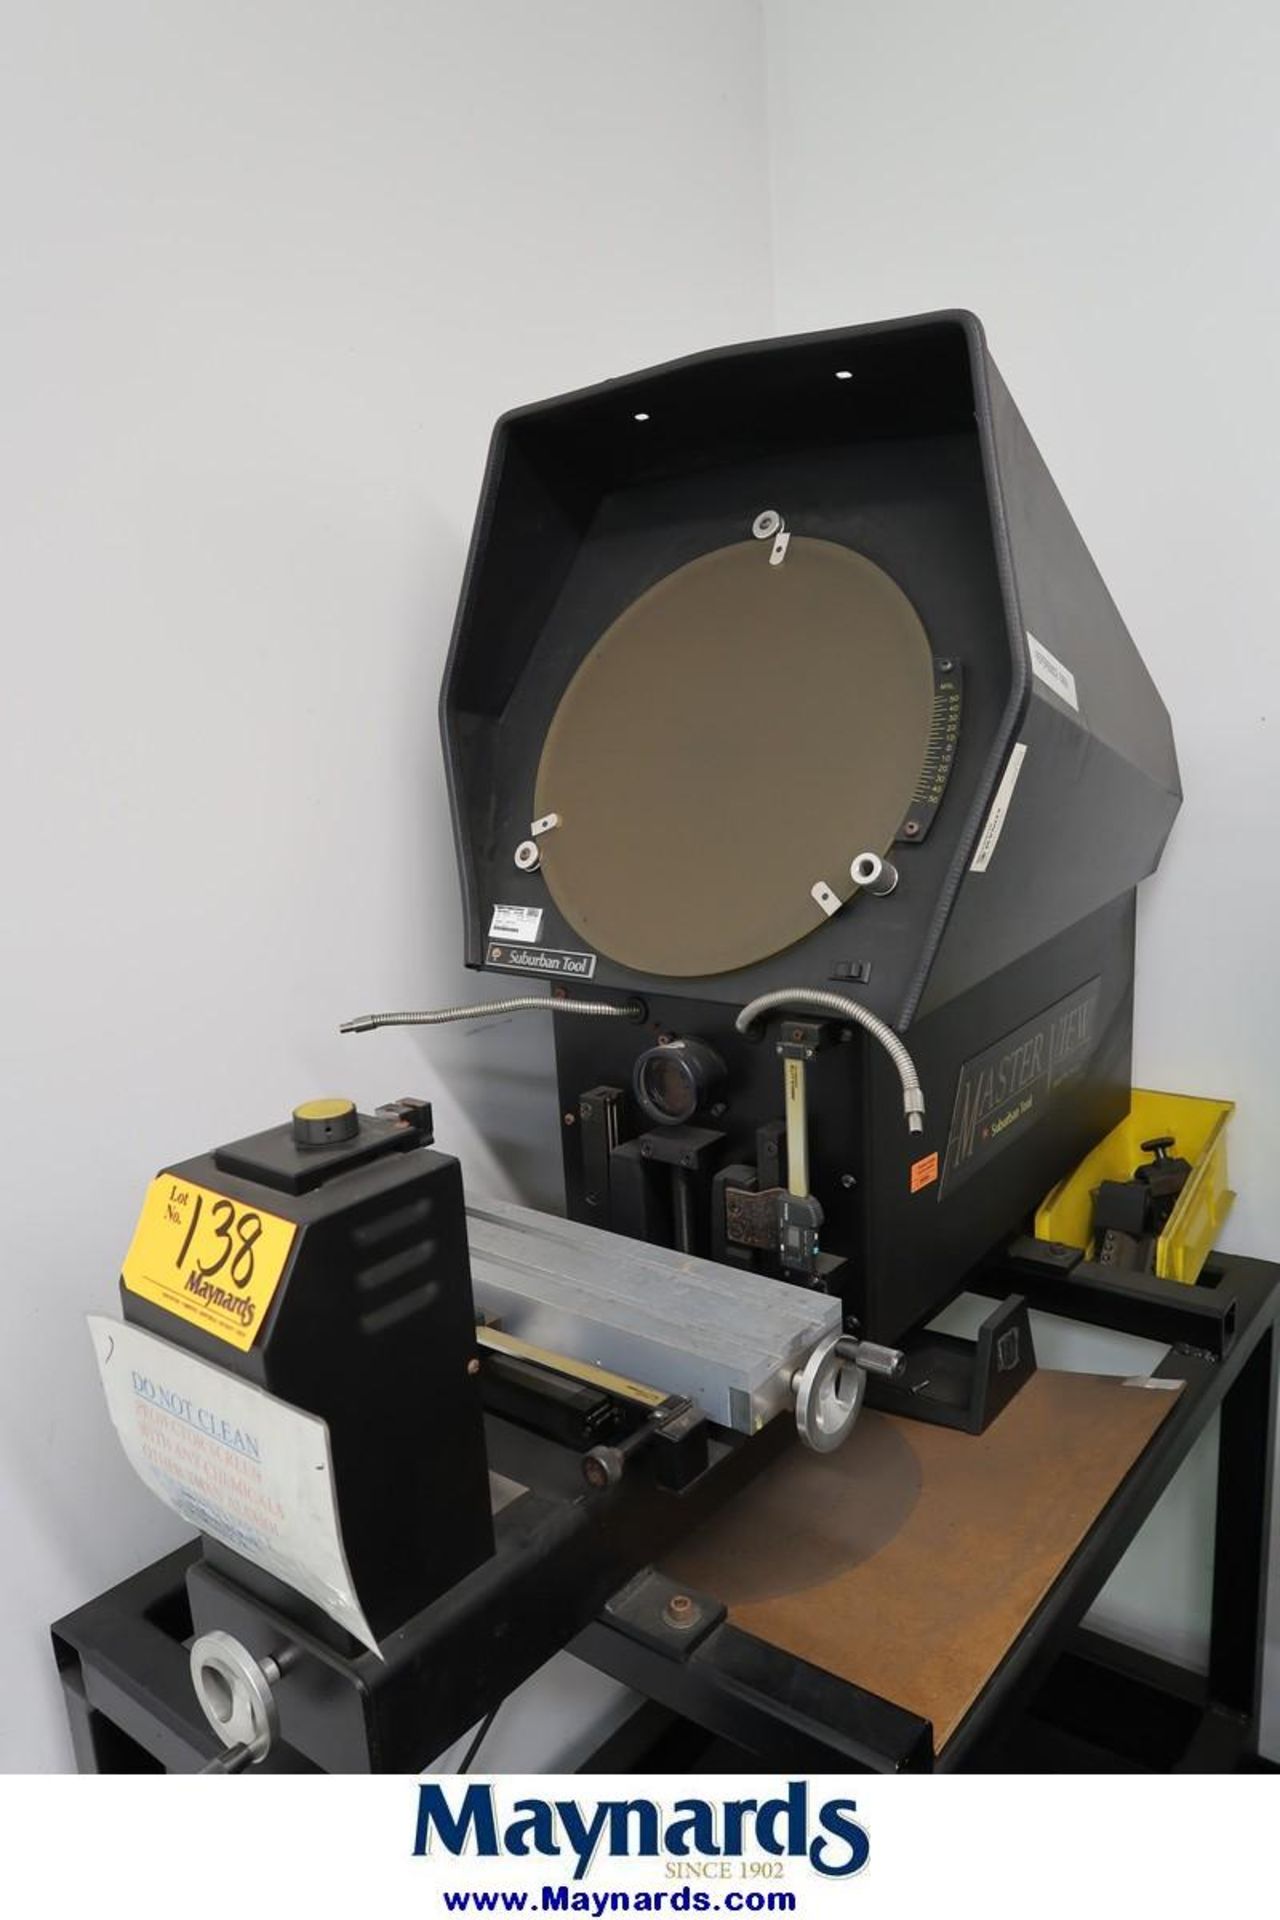 Suburban Tool Master View 14" Optical Comparator - Image 2 of 4